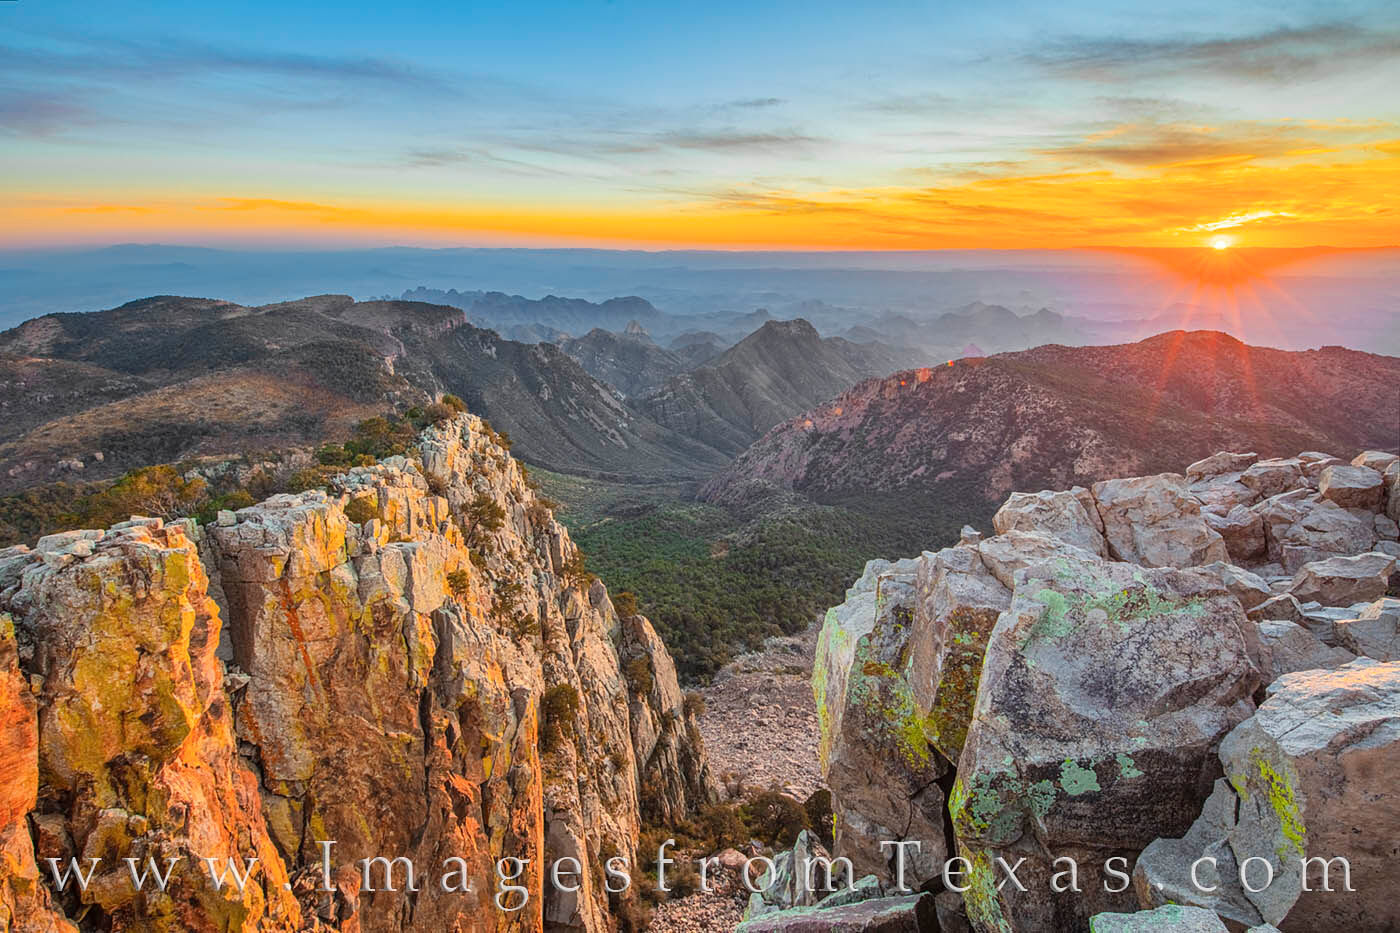 From the highest point in Big Bend National Park - Emory Peak - the views of the rugged Chisos Mountains all the way to Mexico...